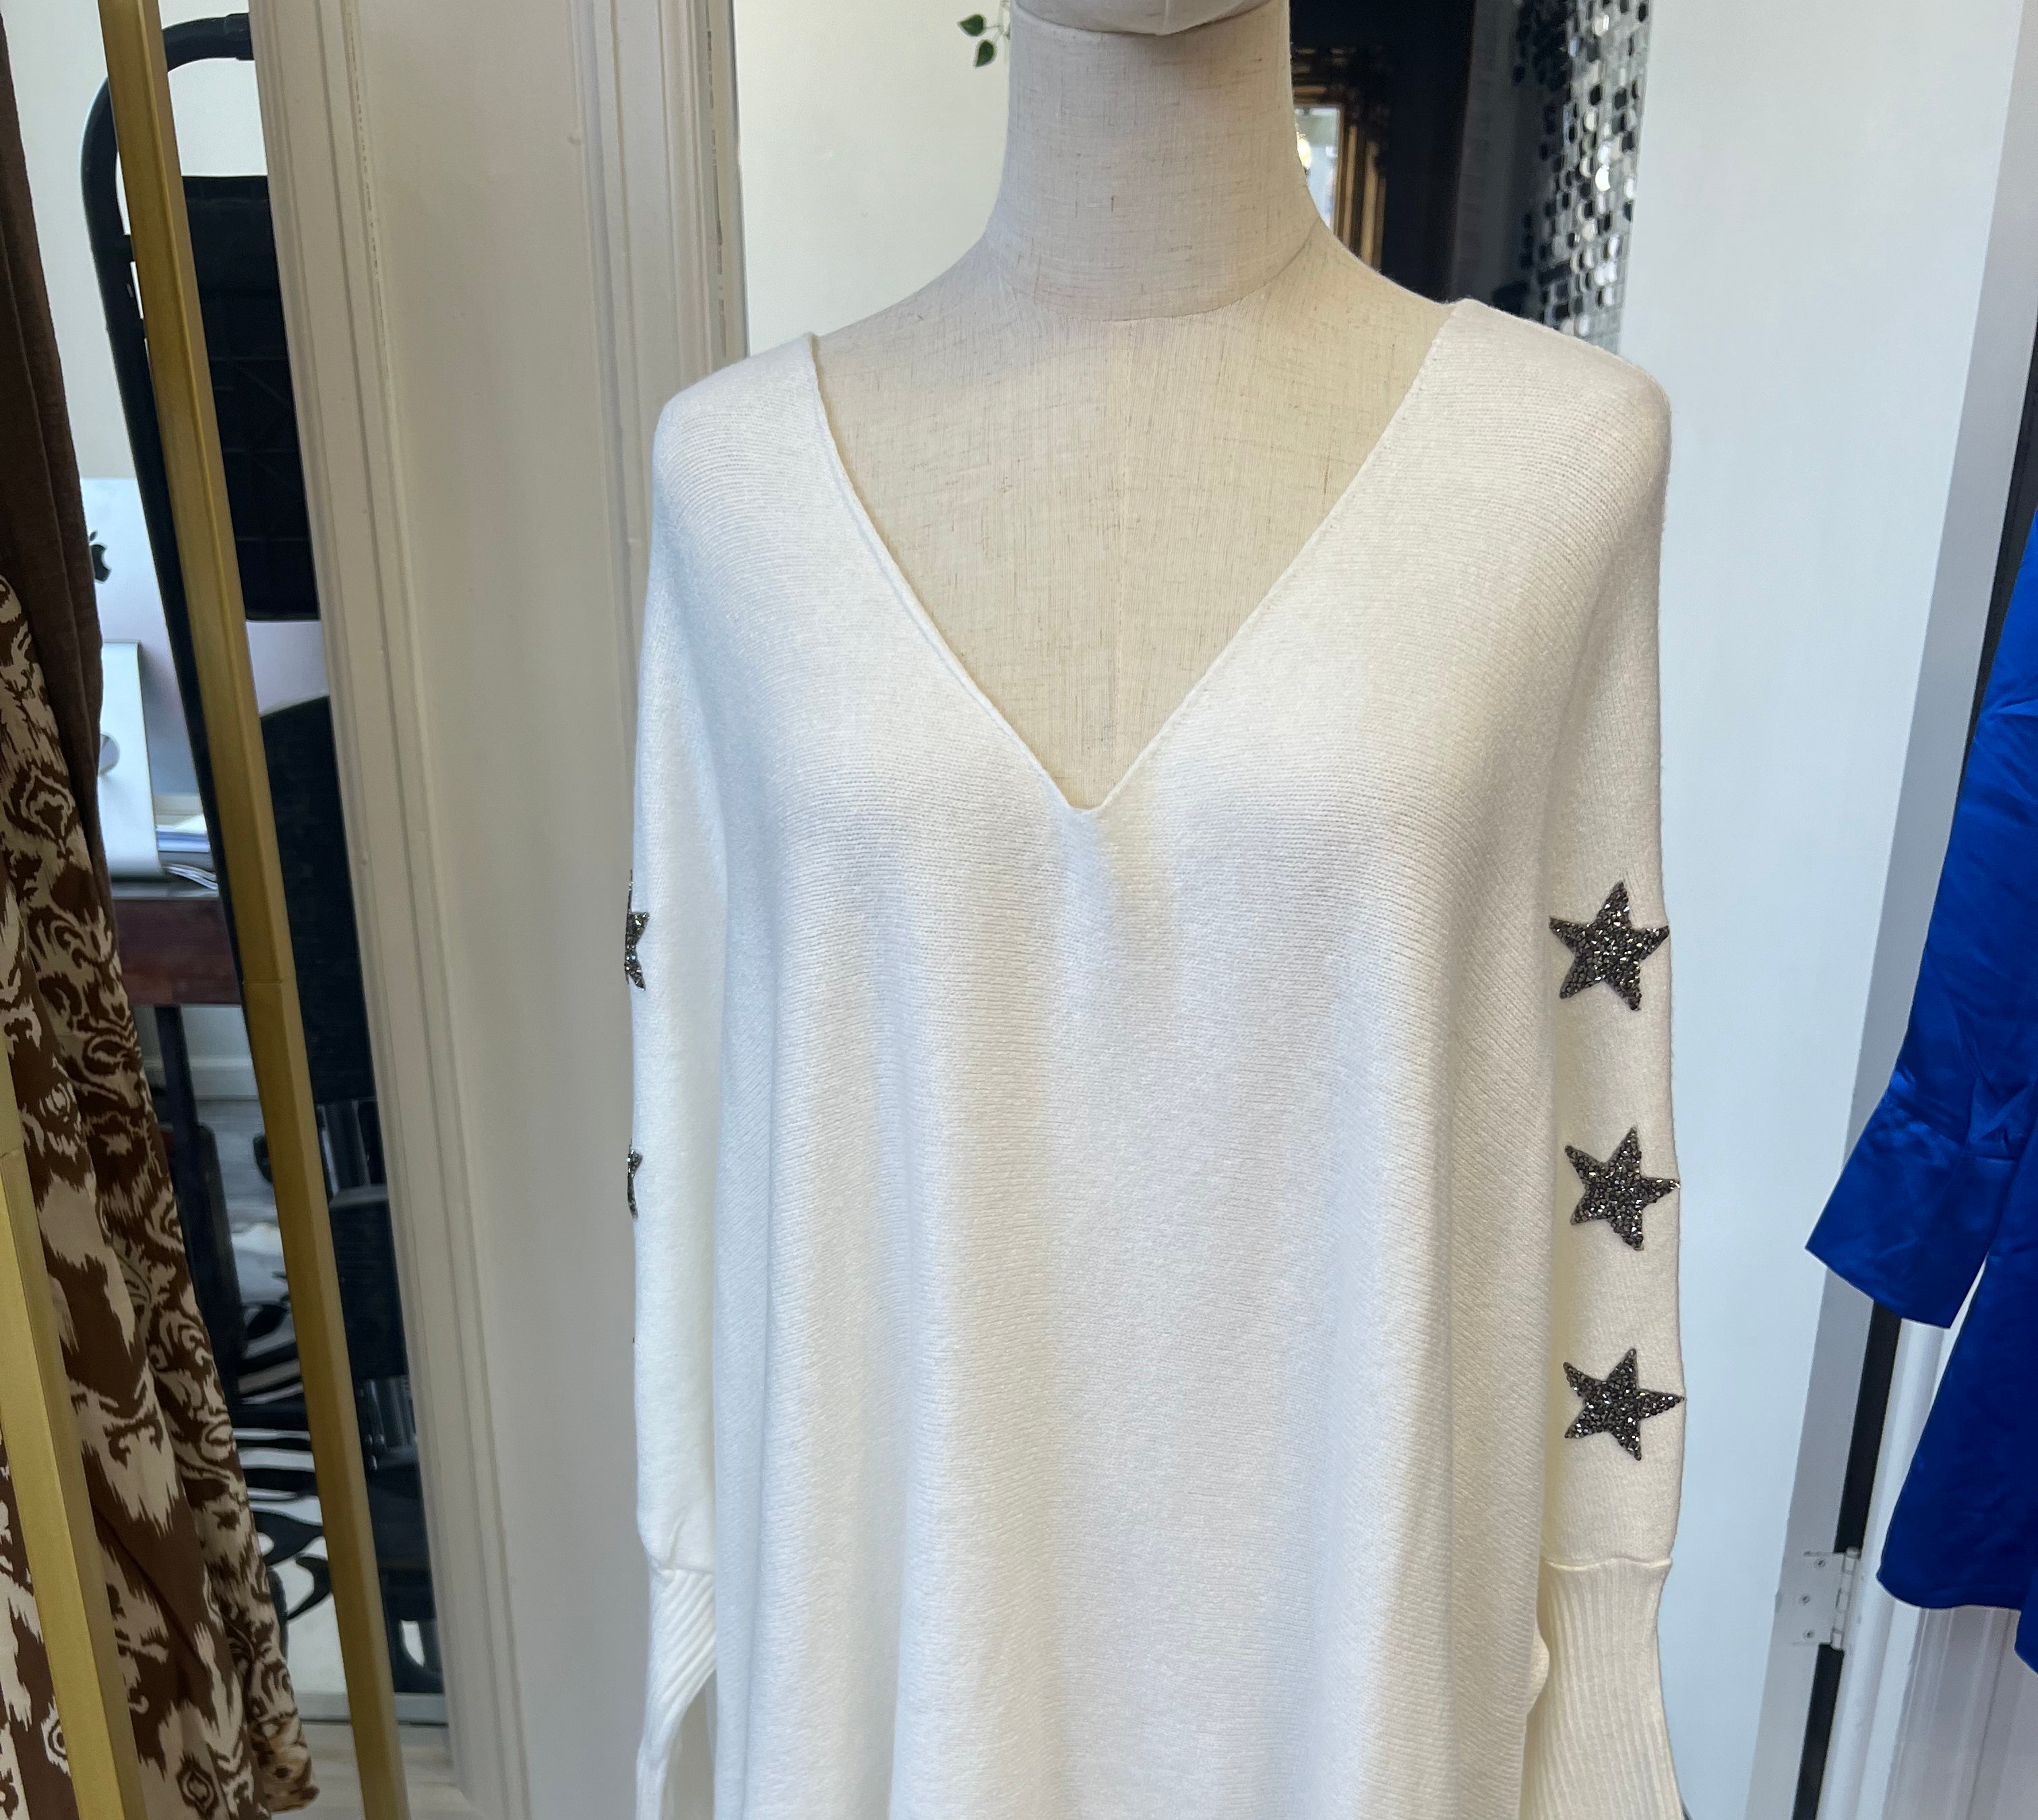 SCANDAL ITALY OLIVIA SWEATER IN CREAM